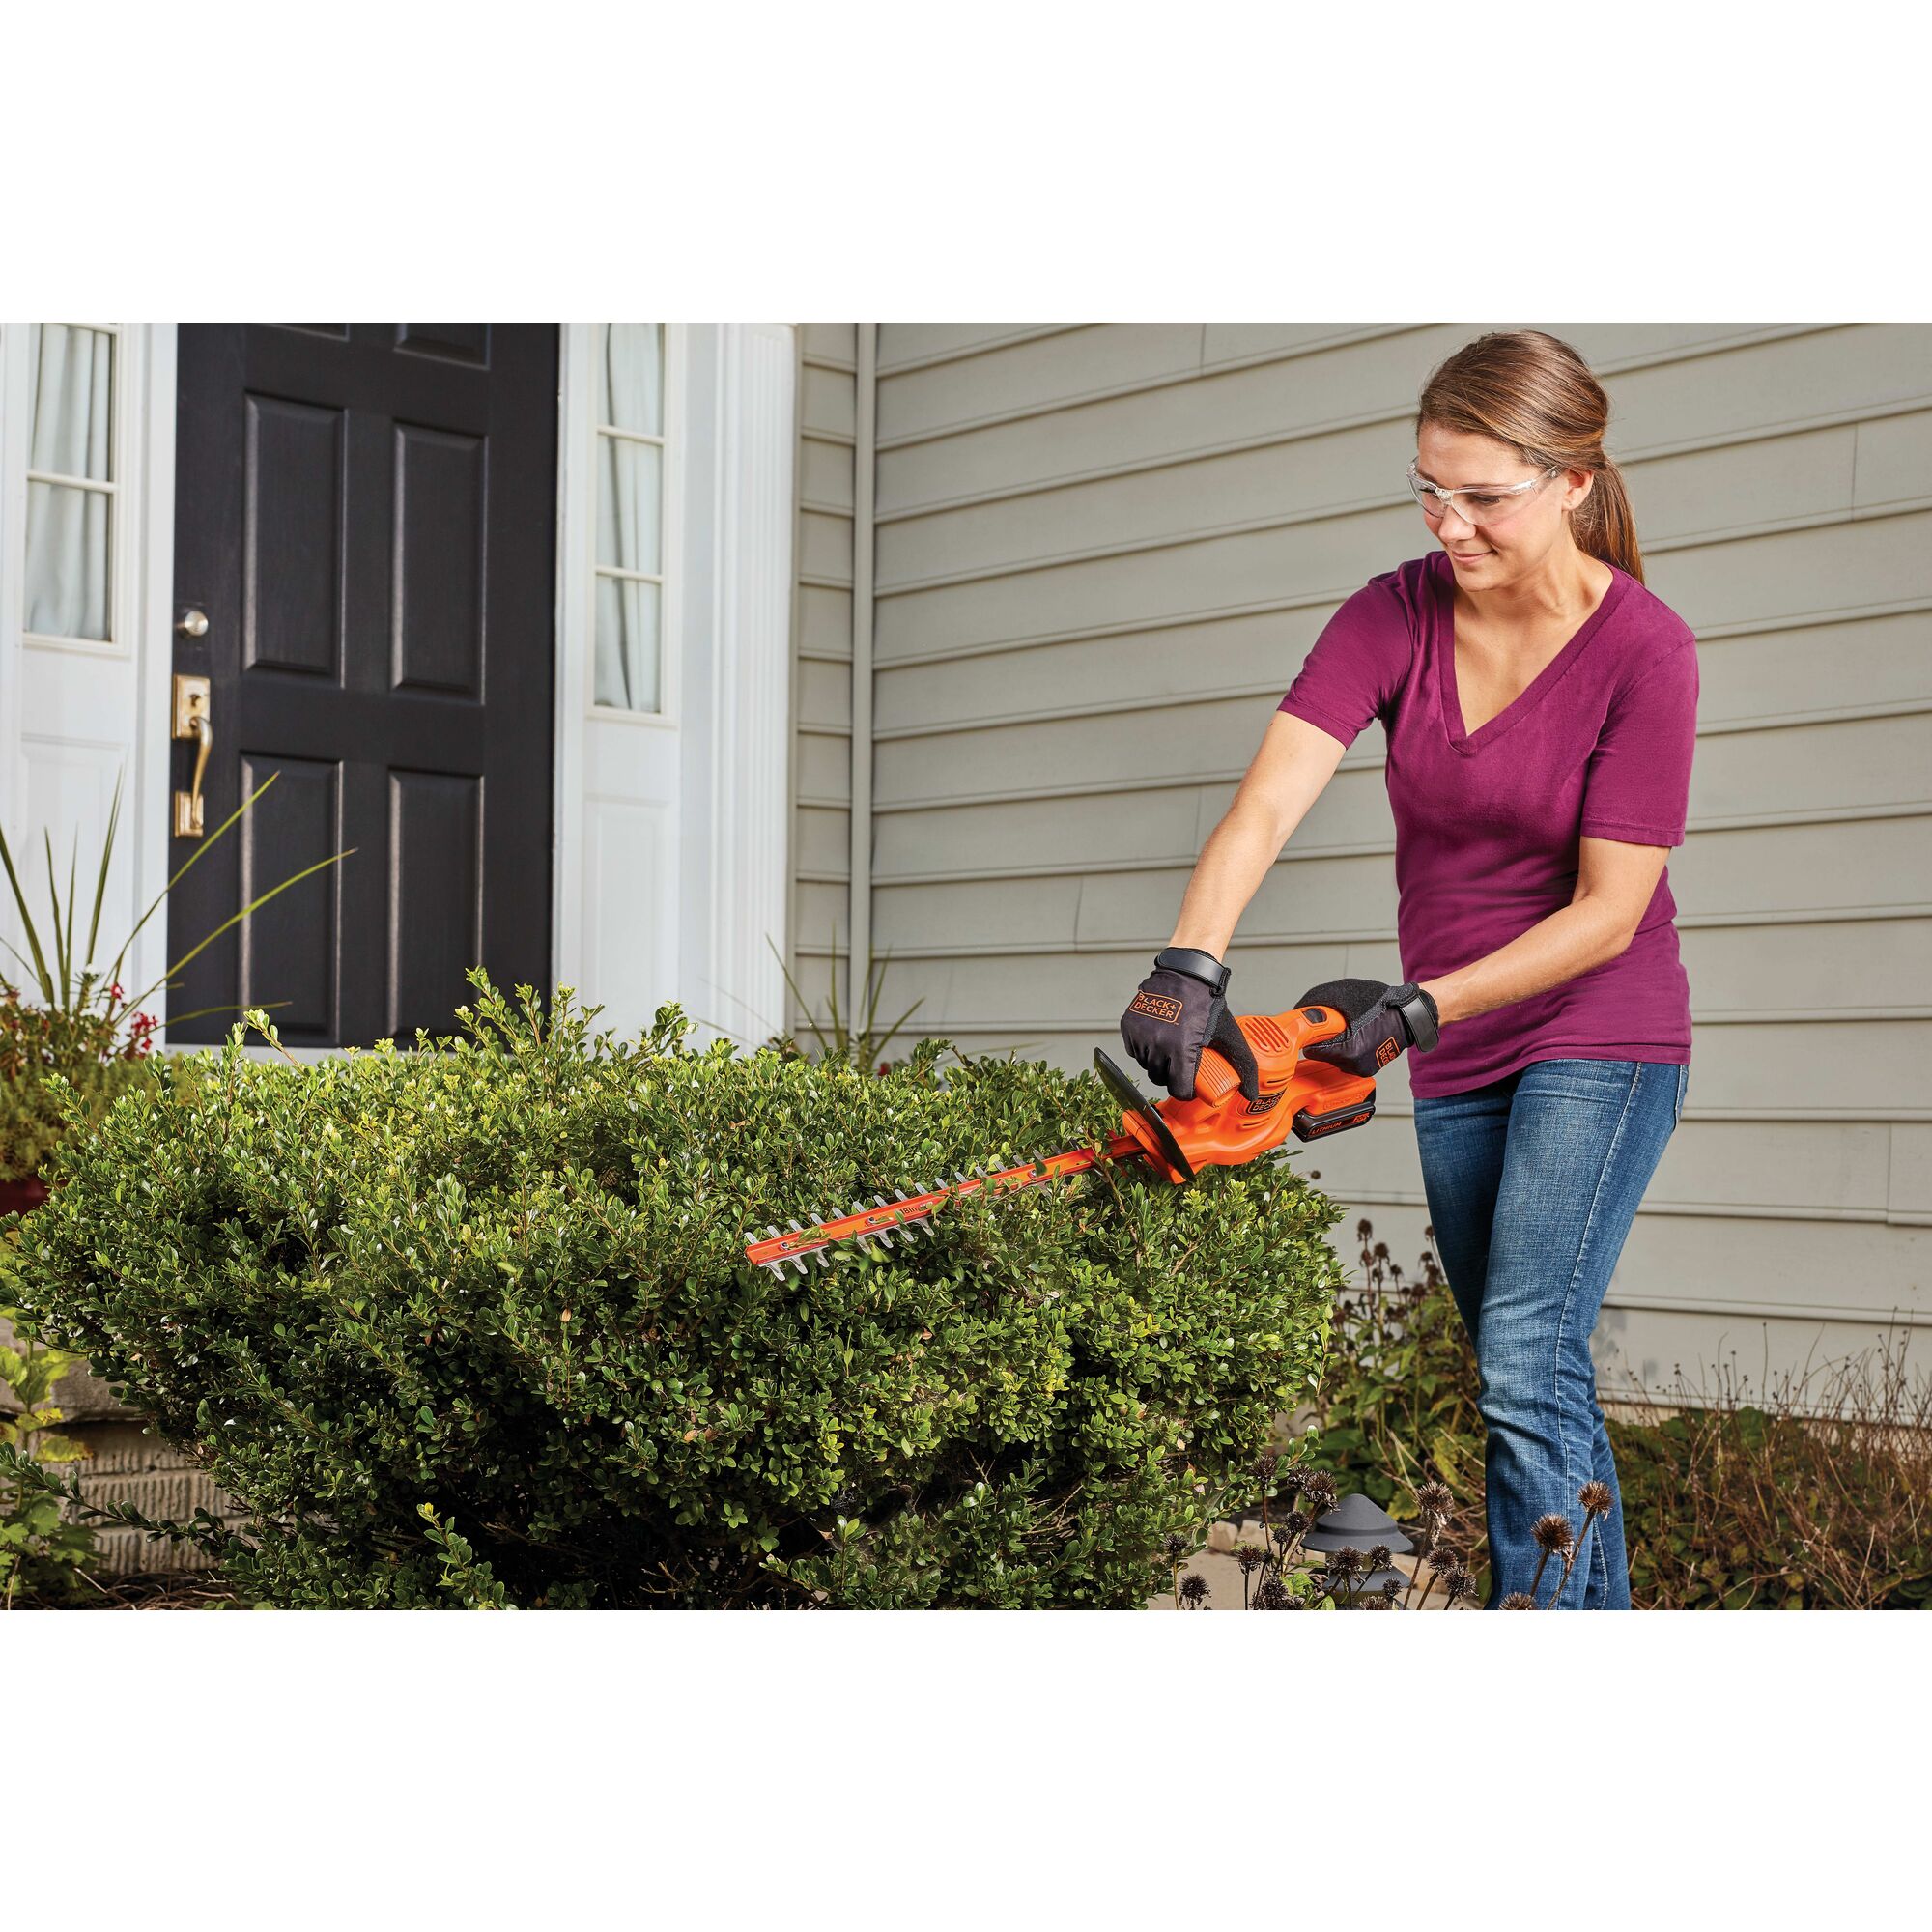 18 inch Cordless hedge trimmer being used by a person to trim bushes.